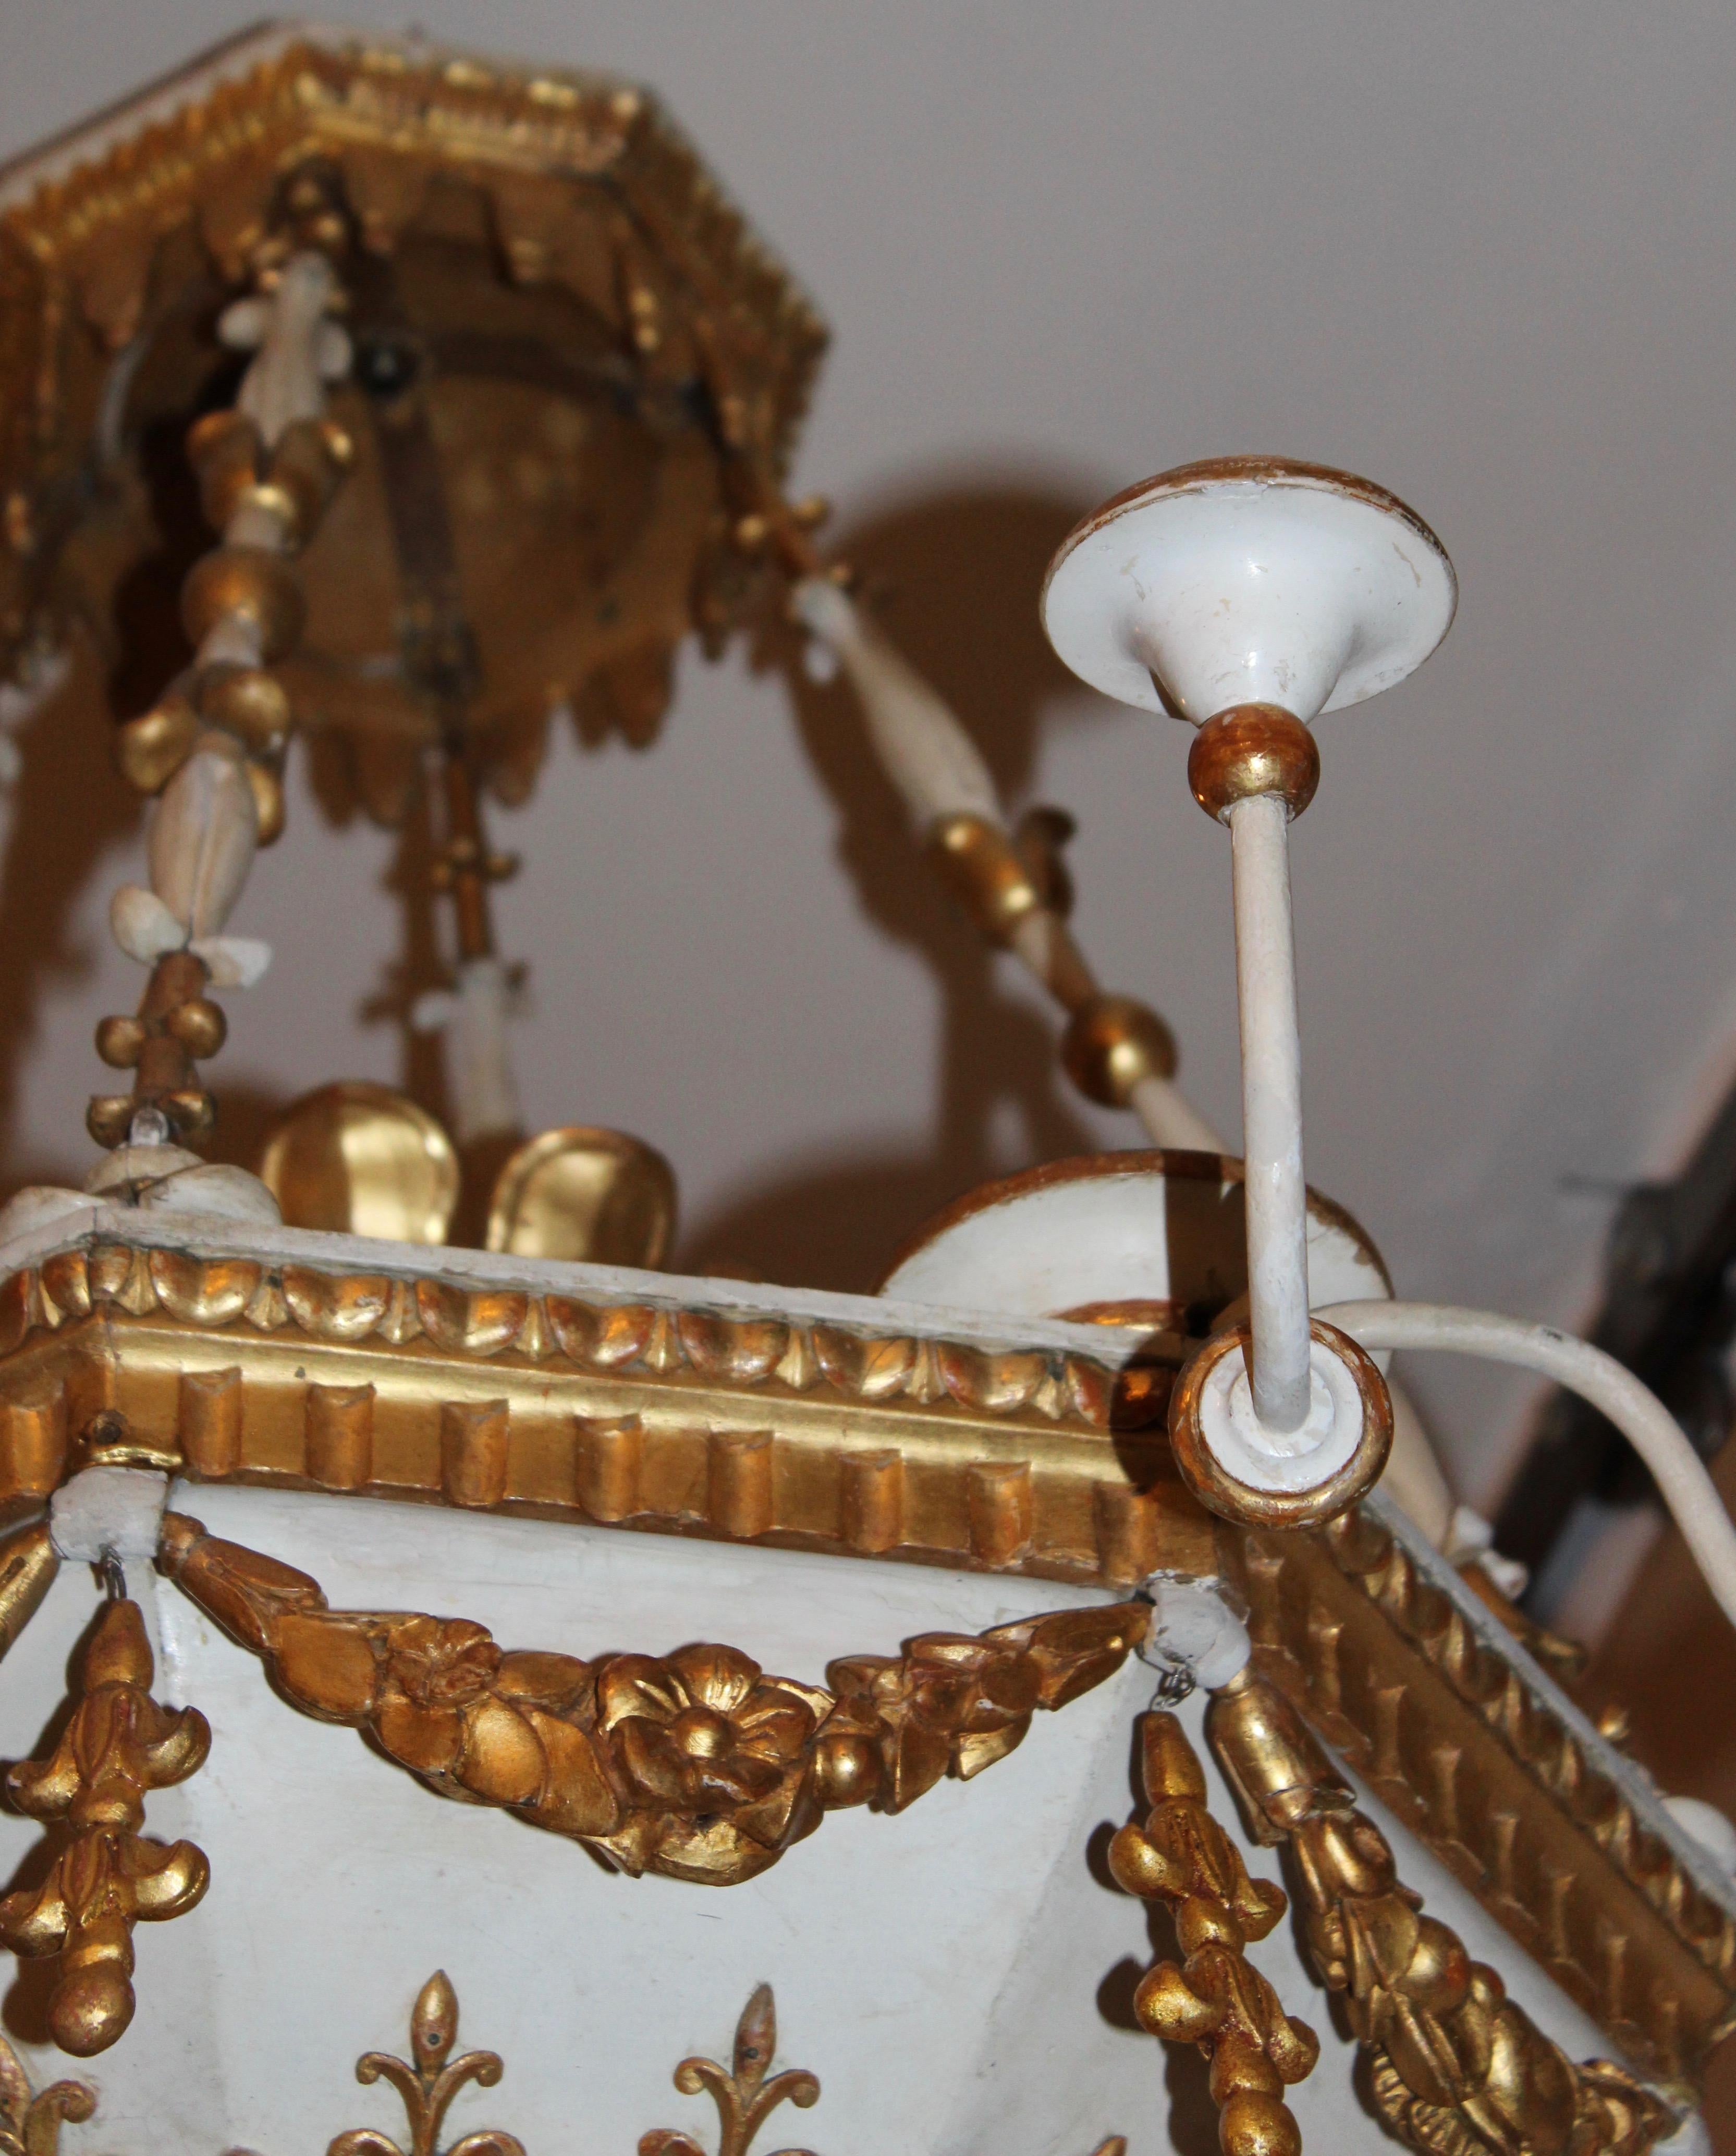 19th Century Pair of Scandinavian Neoclassical Gilt and Painted Chandeliers, circa 1810